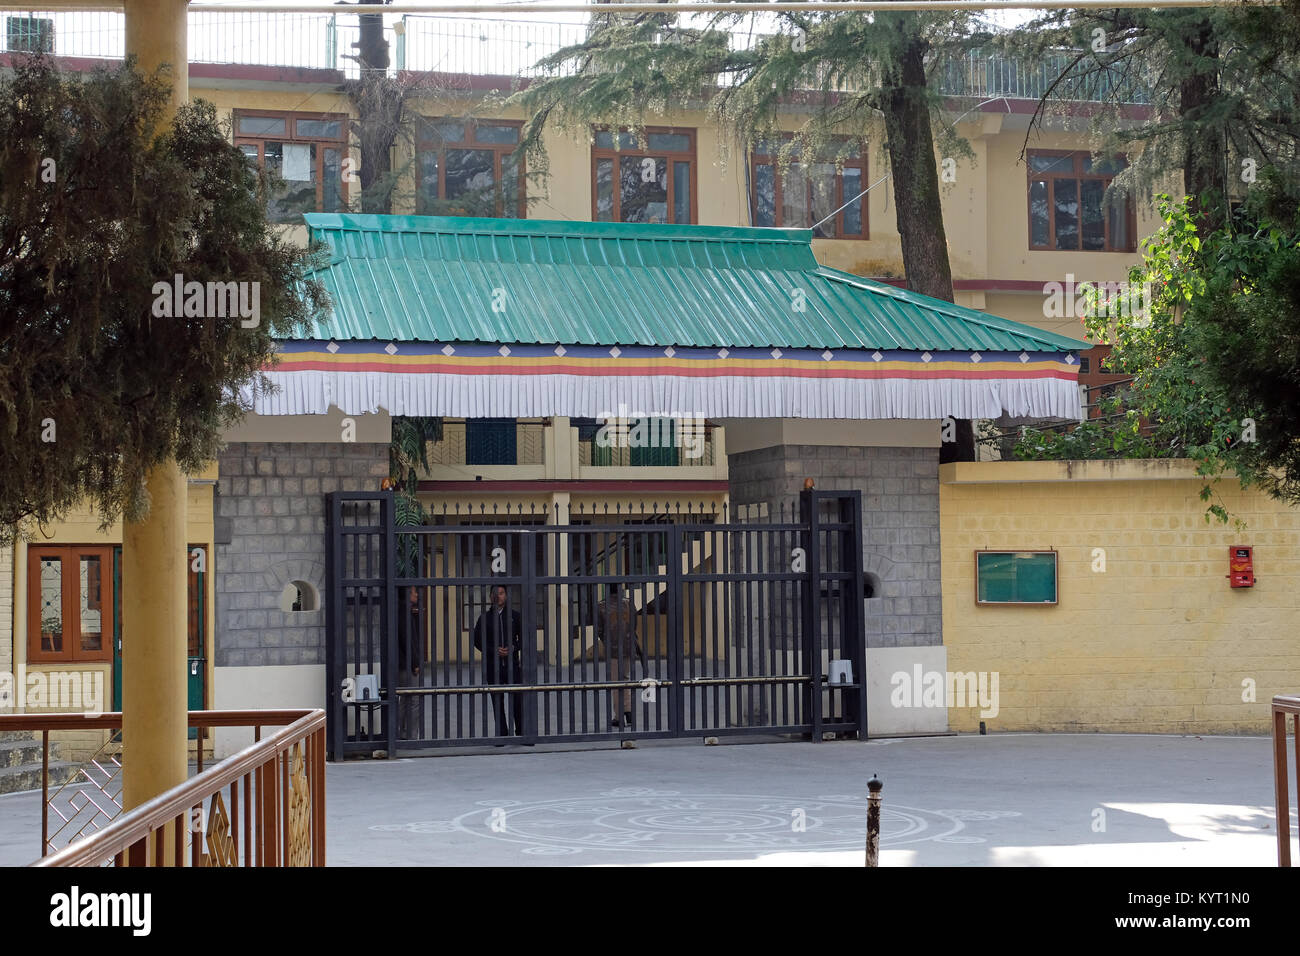 The compound of The Dalai Lama at the Tibetan Government in Exile, Daramshala, India Stock Photo